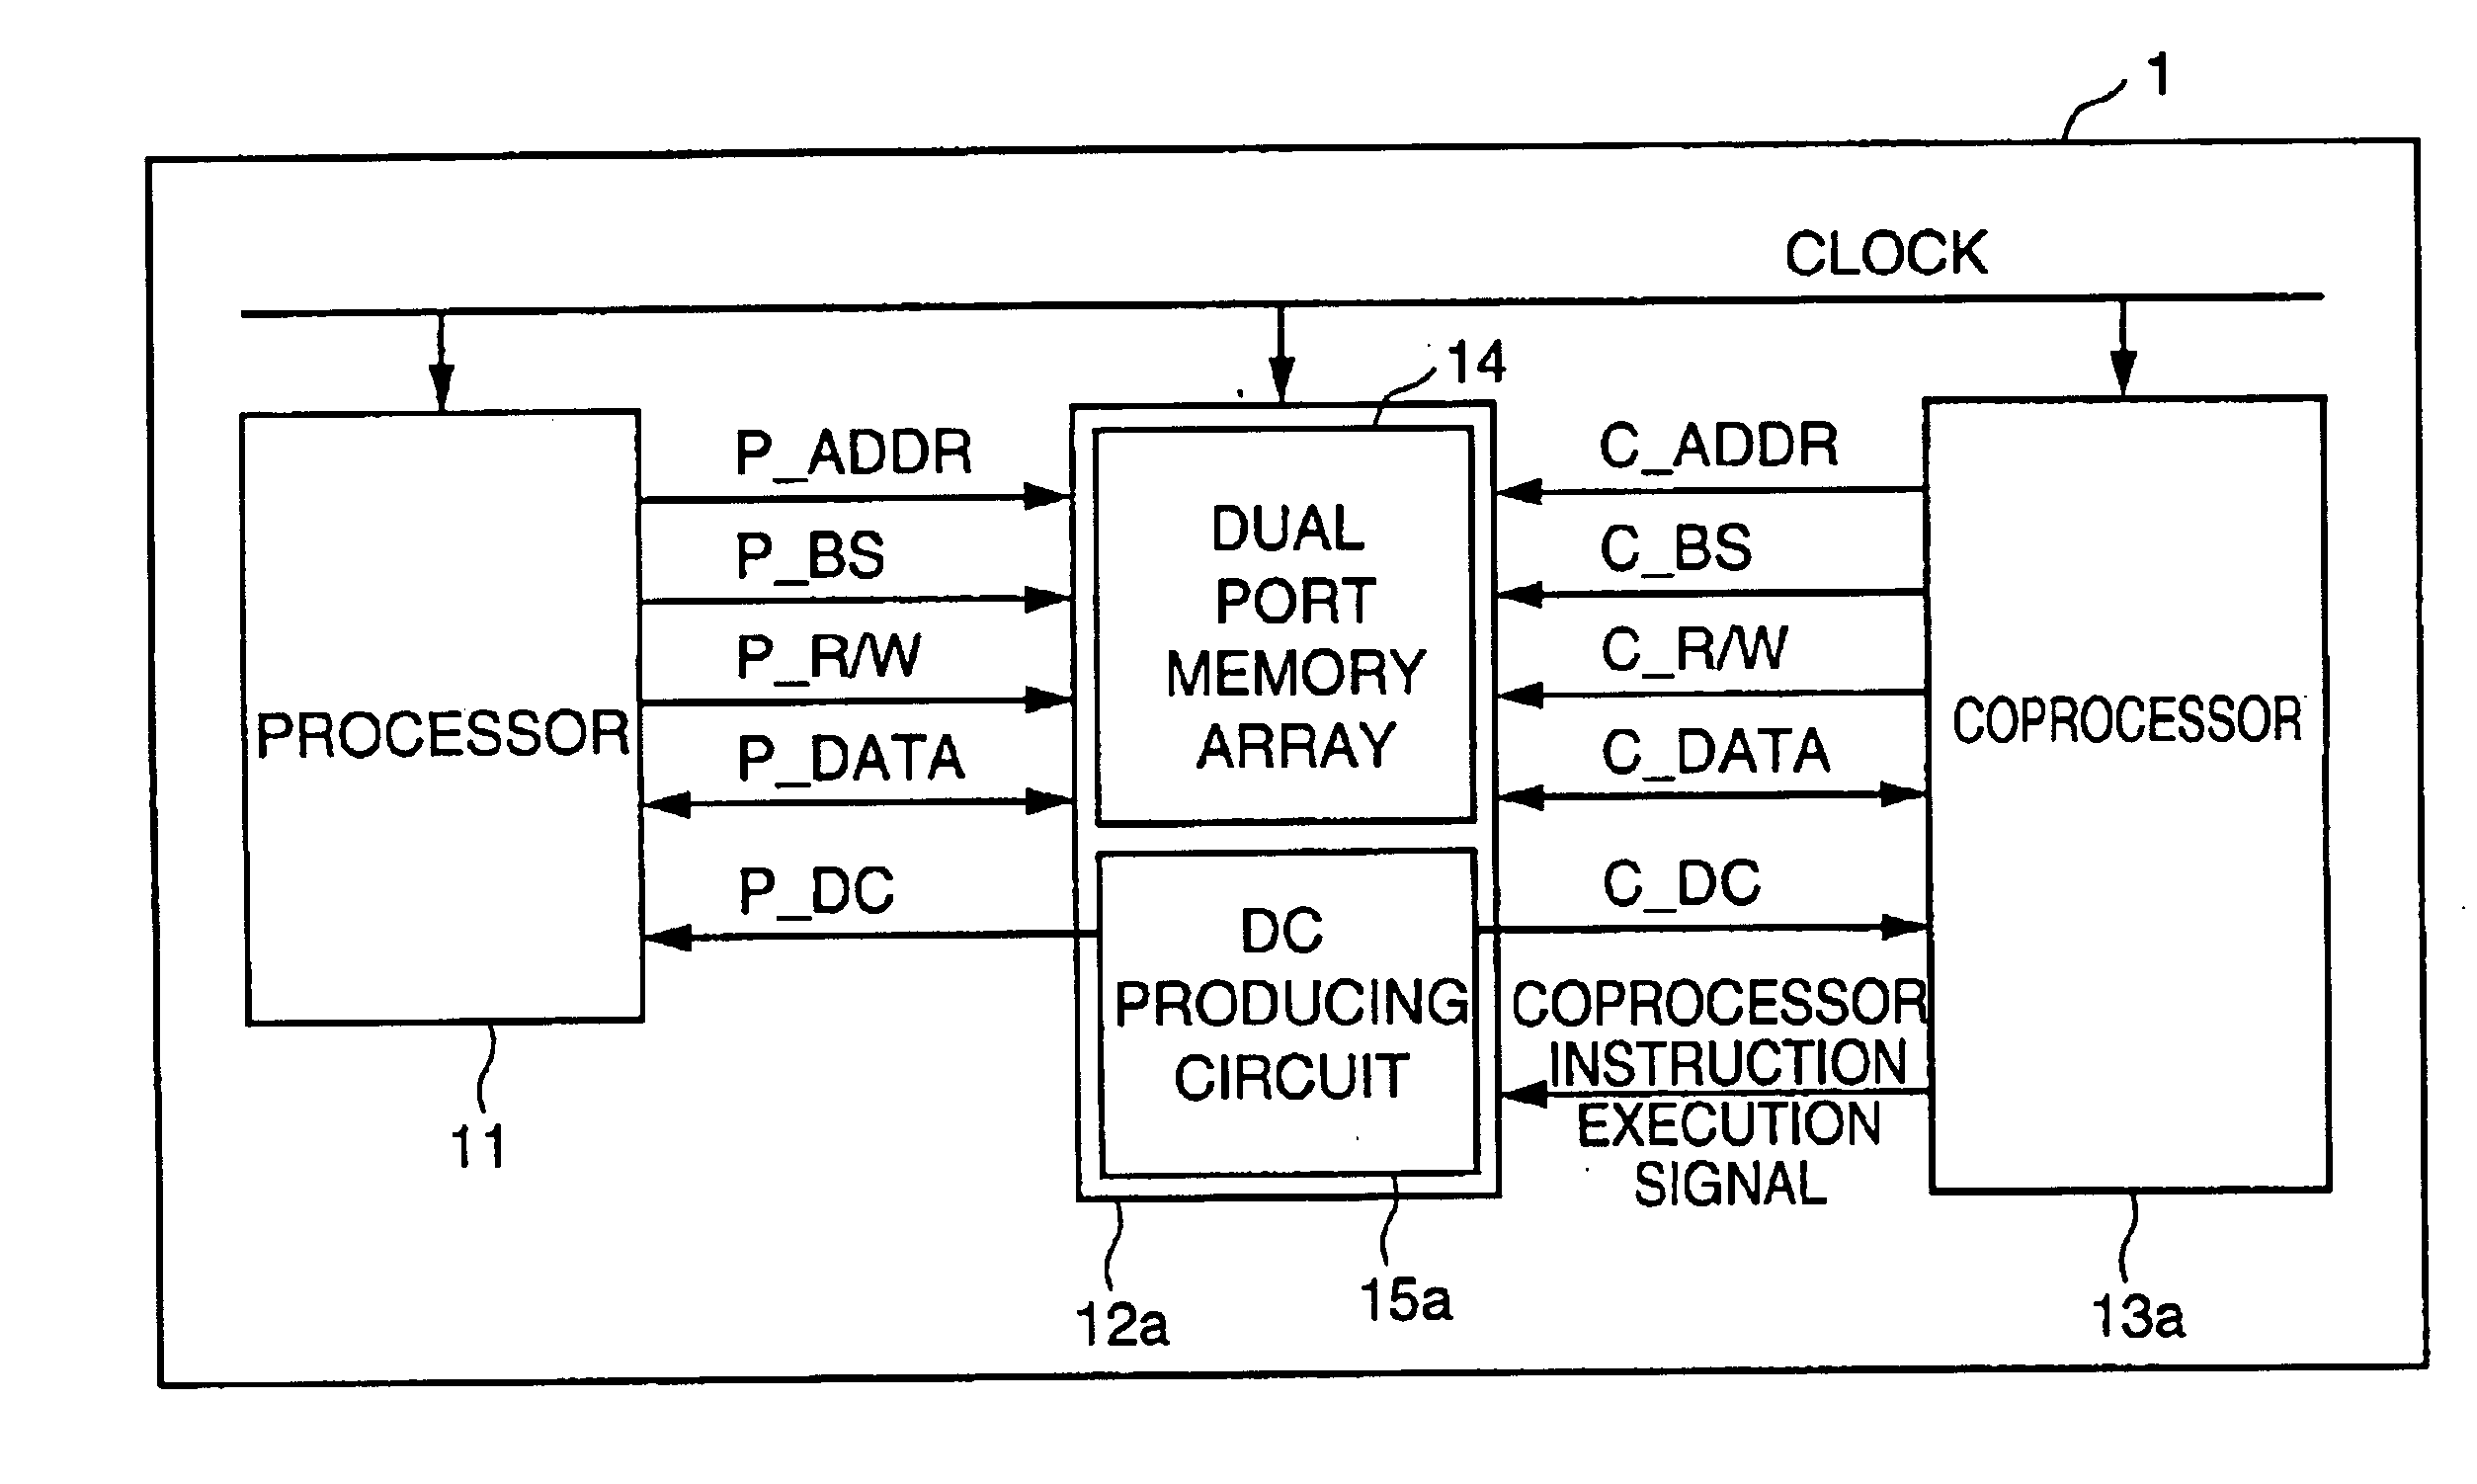 Synchronous signal producing circuit for controlling a data ready signal indicative of end of access to a shared memory and thereby controlling synchronization between processor and coprocessor